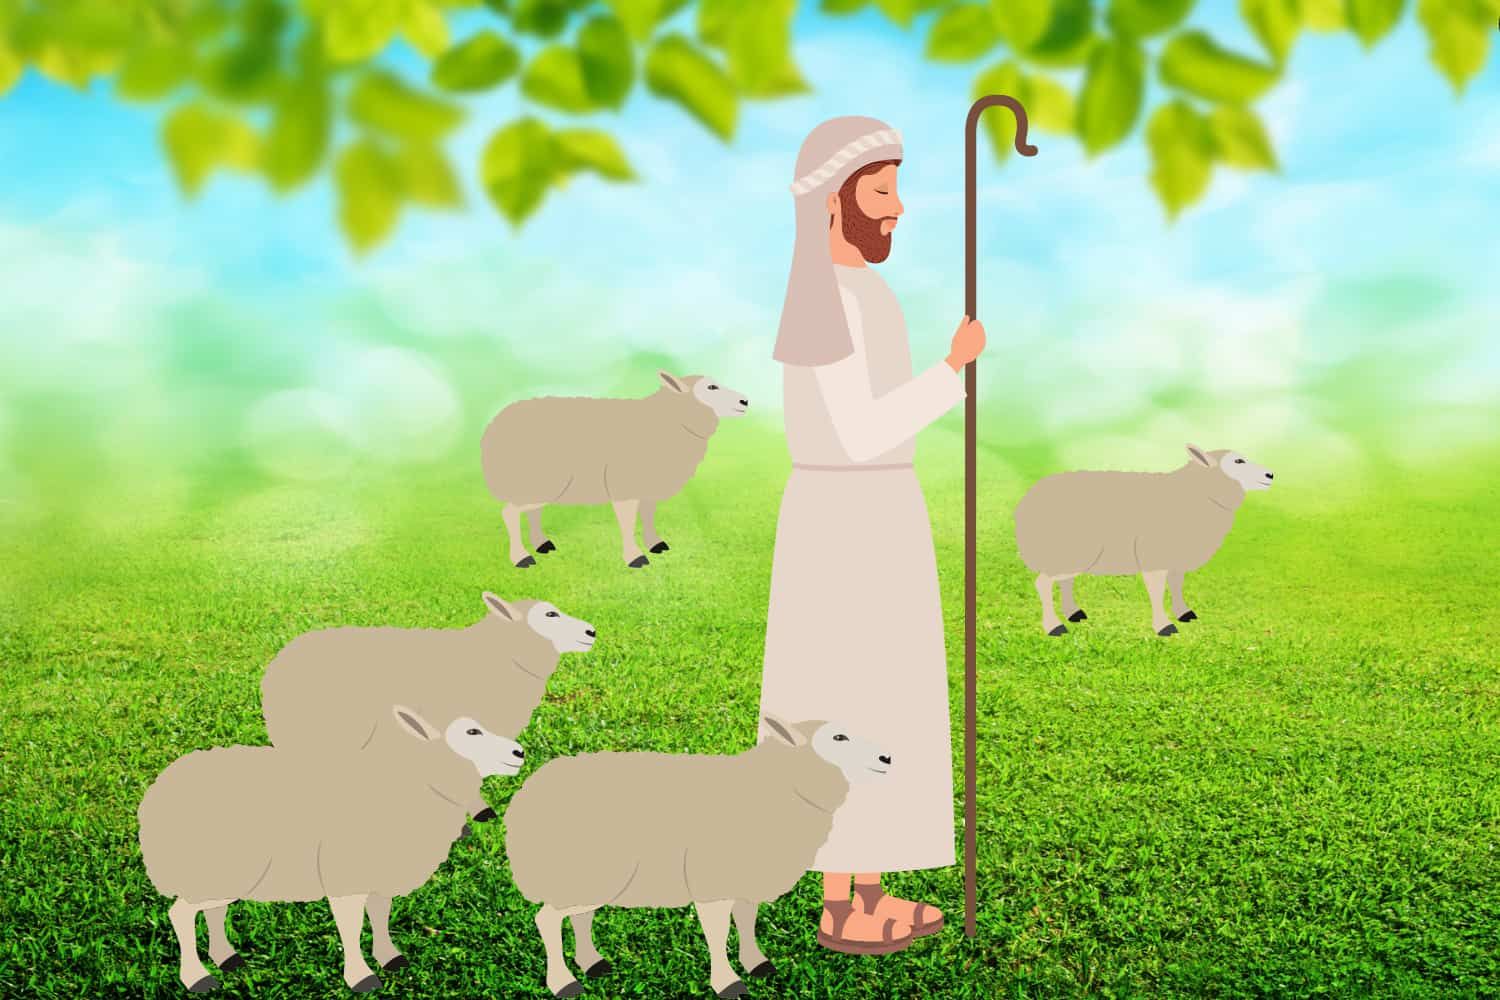 Icebreaker%20-%20NT%20Parable%20of%20the%20lost%20sheep%20-%20Sheep%20sheep%20shepherd-a3e5a649 Jesus (of Nazareth)